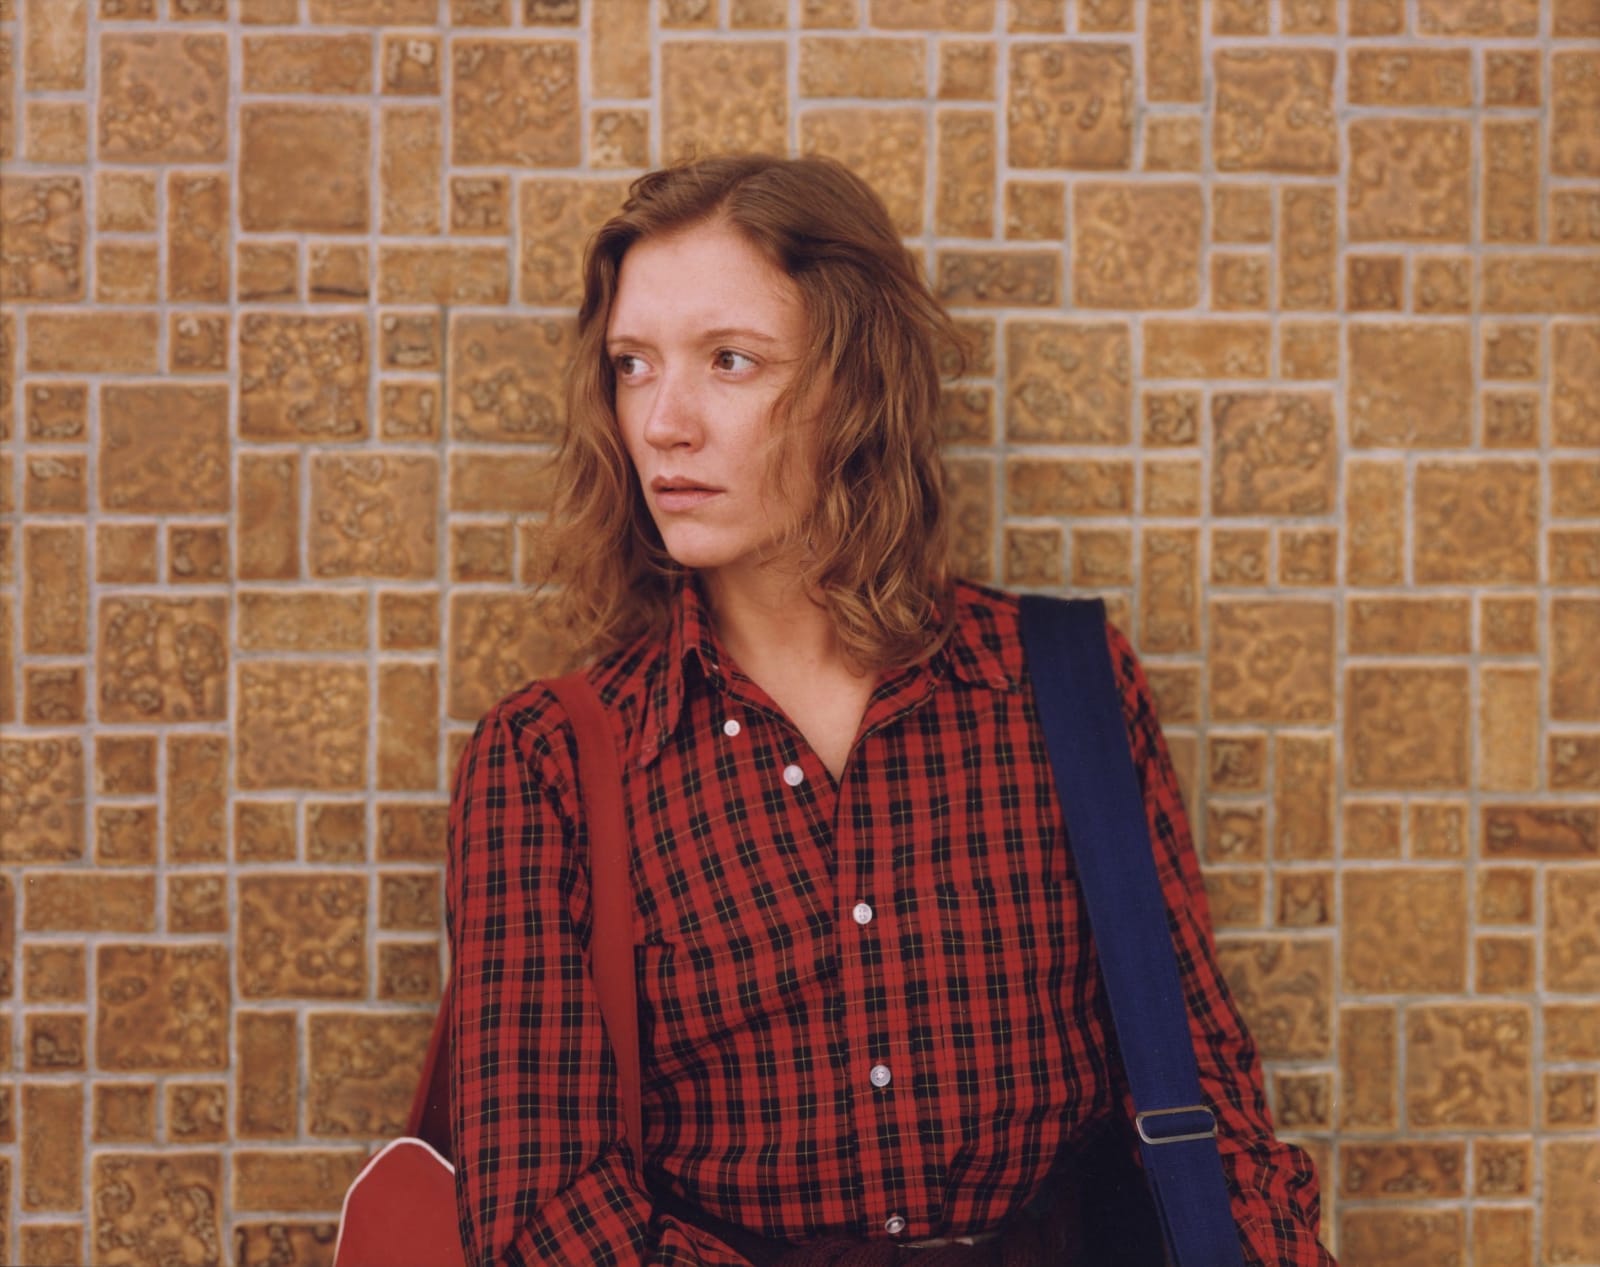 Ginger Shore wearing red plaid shirt against brick wall by Stephen Shore